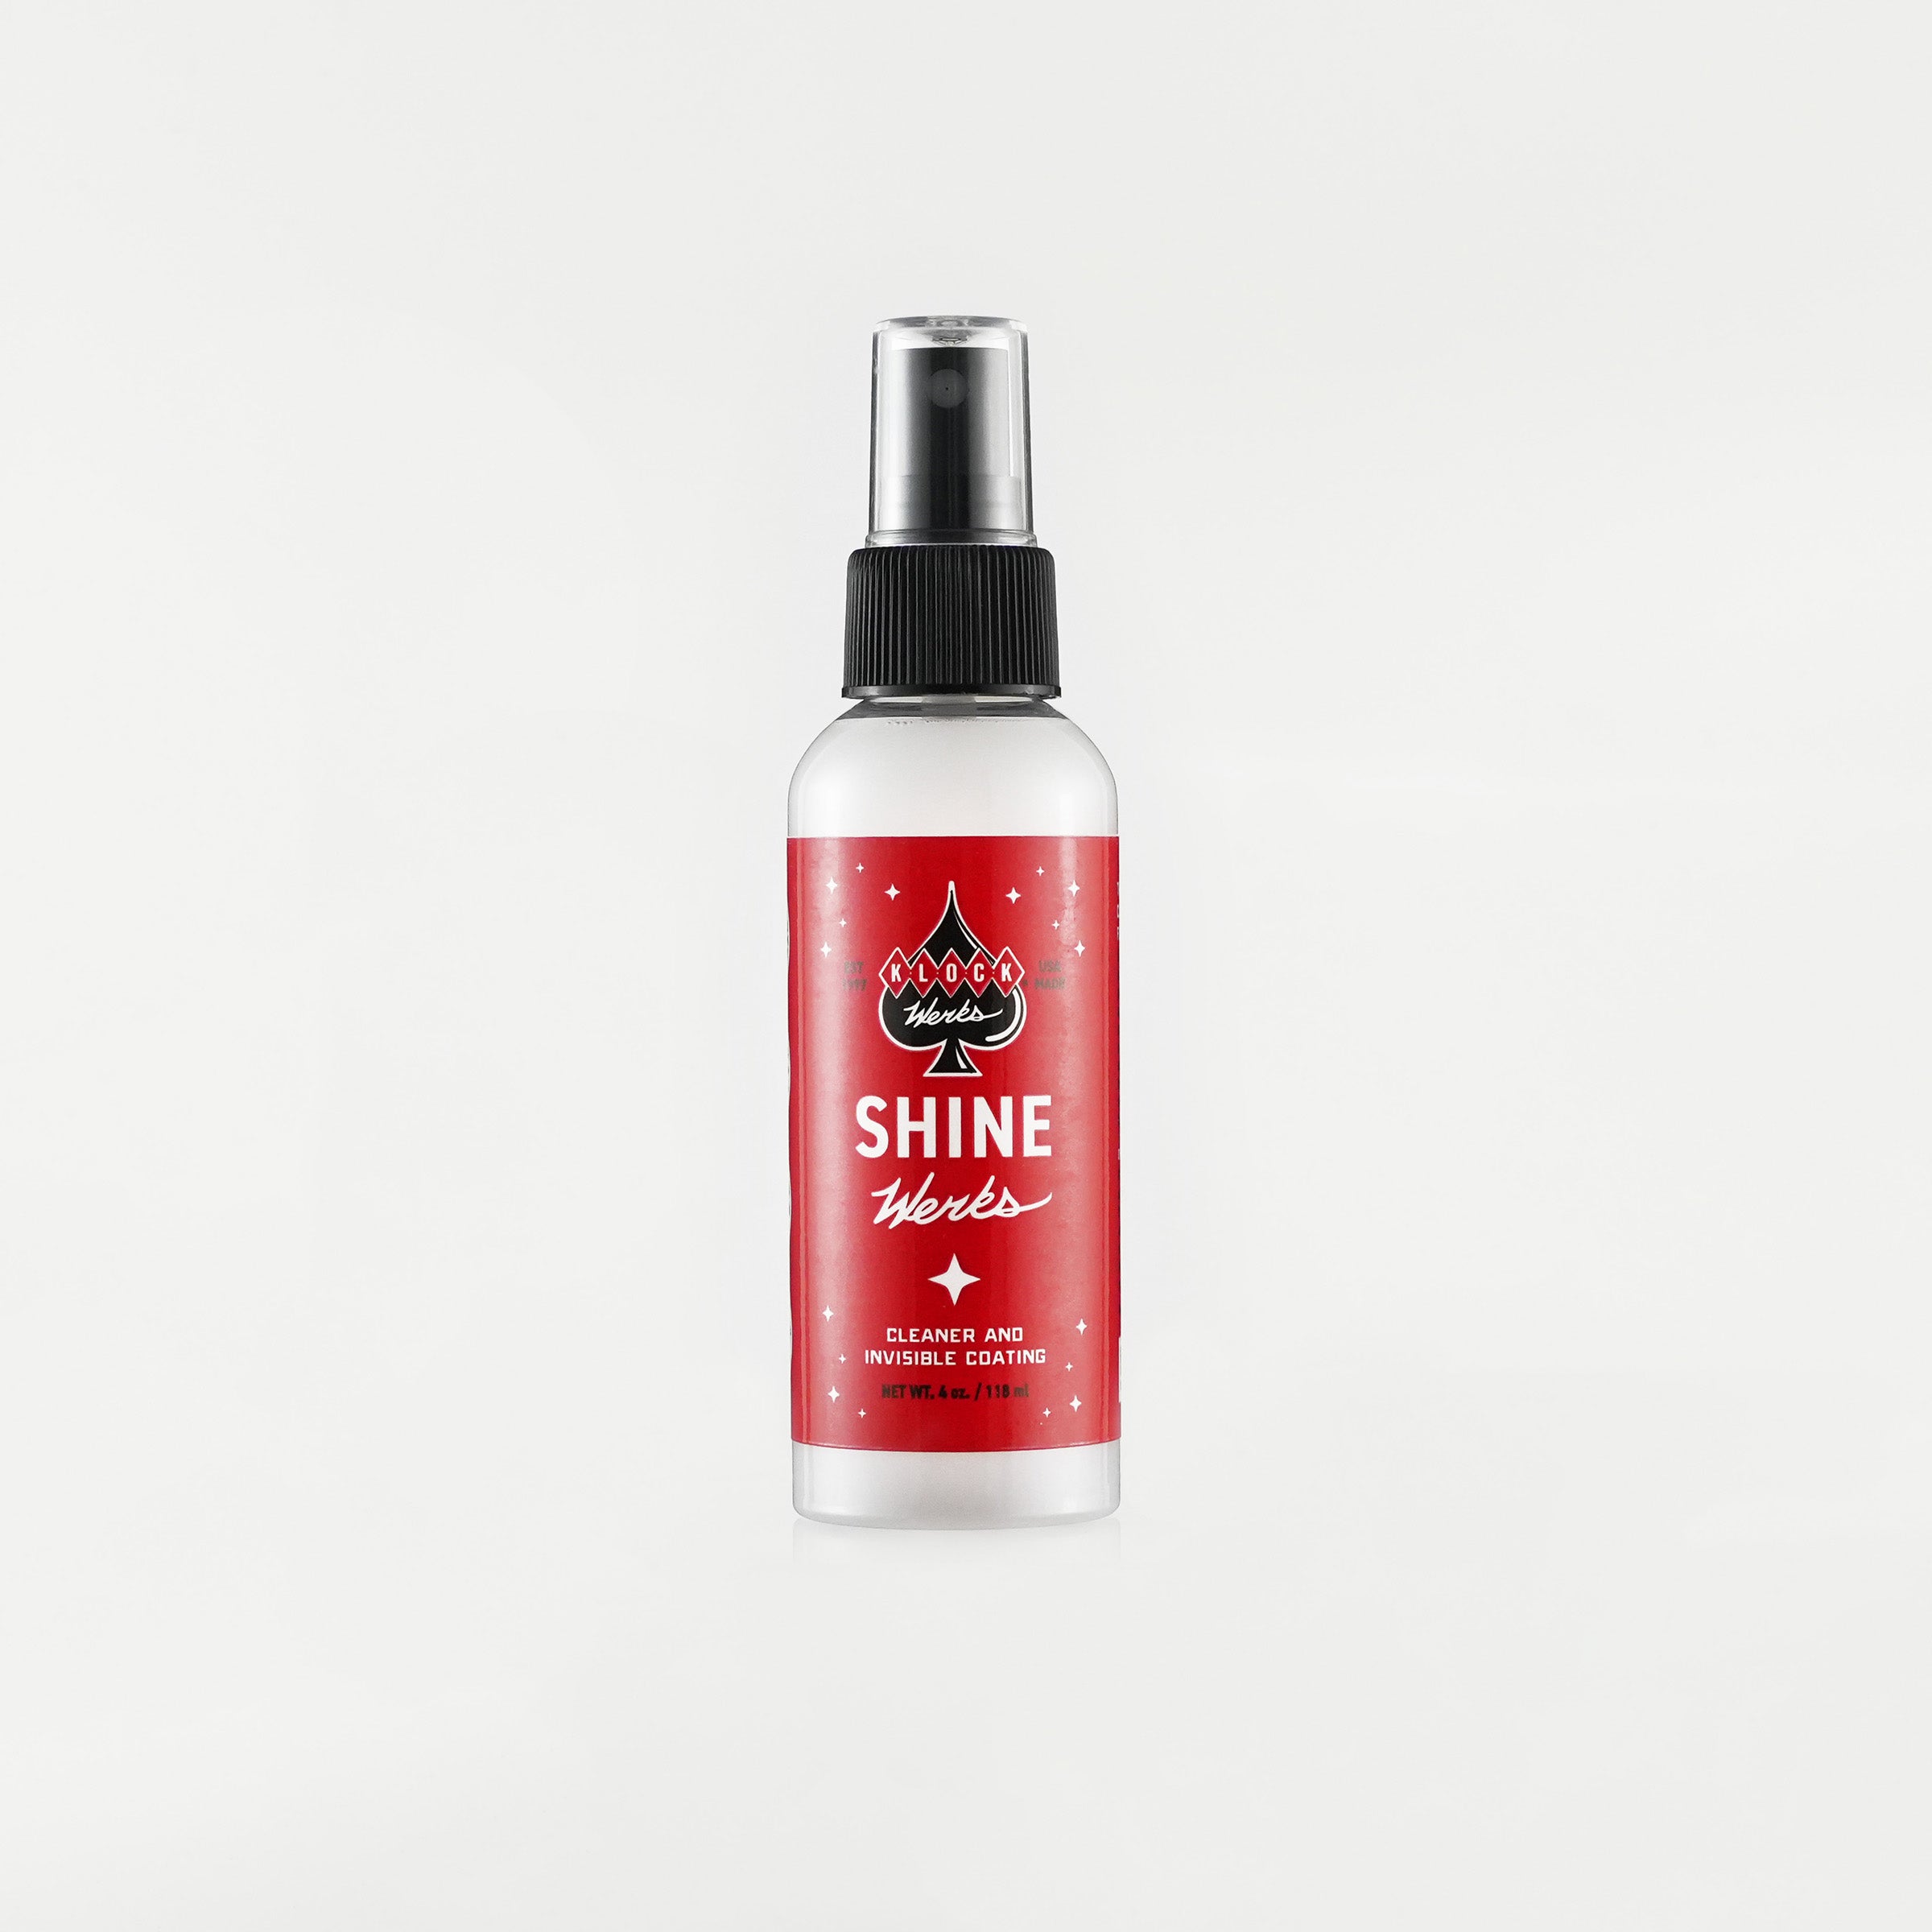 4 ounce Shine Werks cleaning and polishing product(4 oz. Shine Werks)